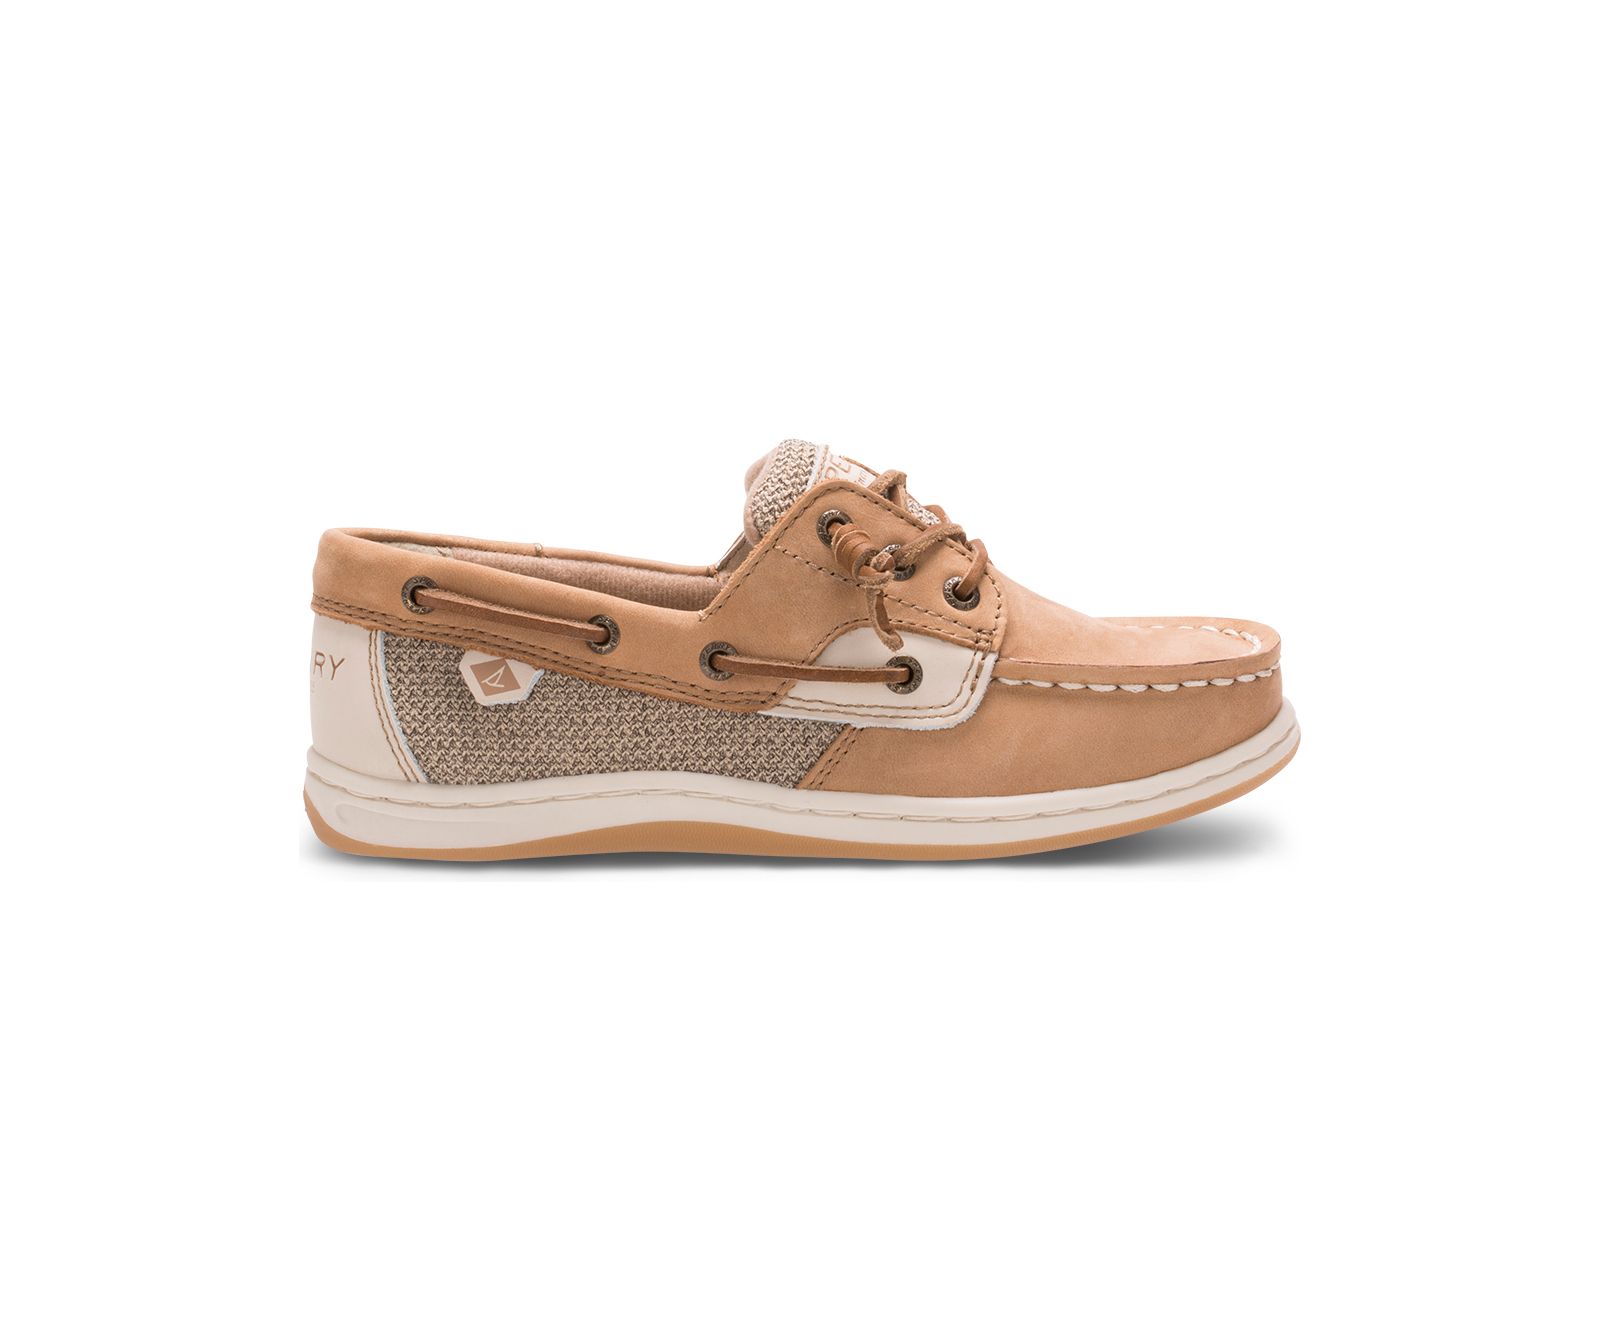 Big Kid's Songfish Boat Shoe - Big Kid (sizes 10.5 & up) | Sperry